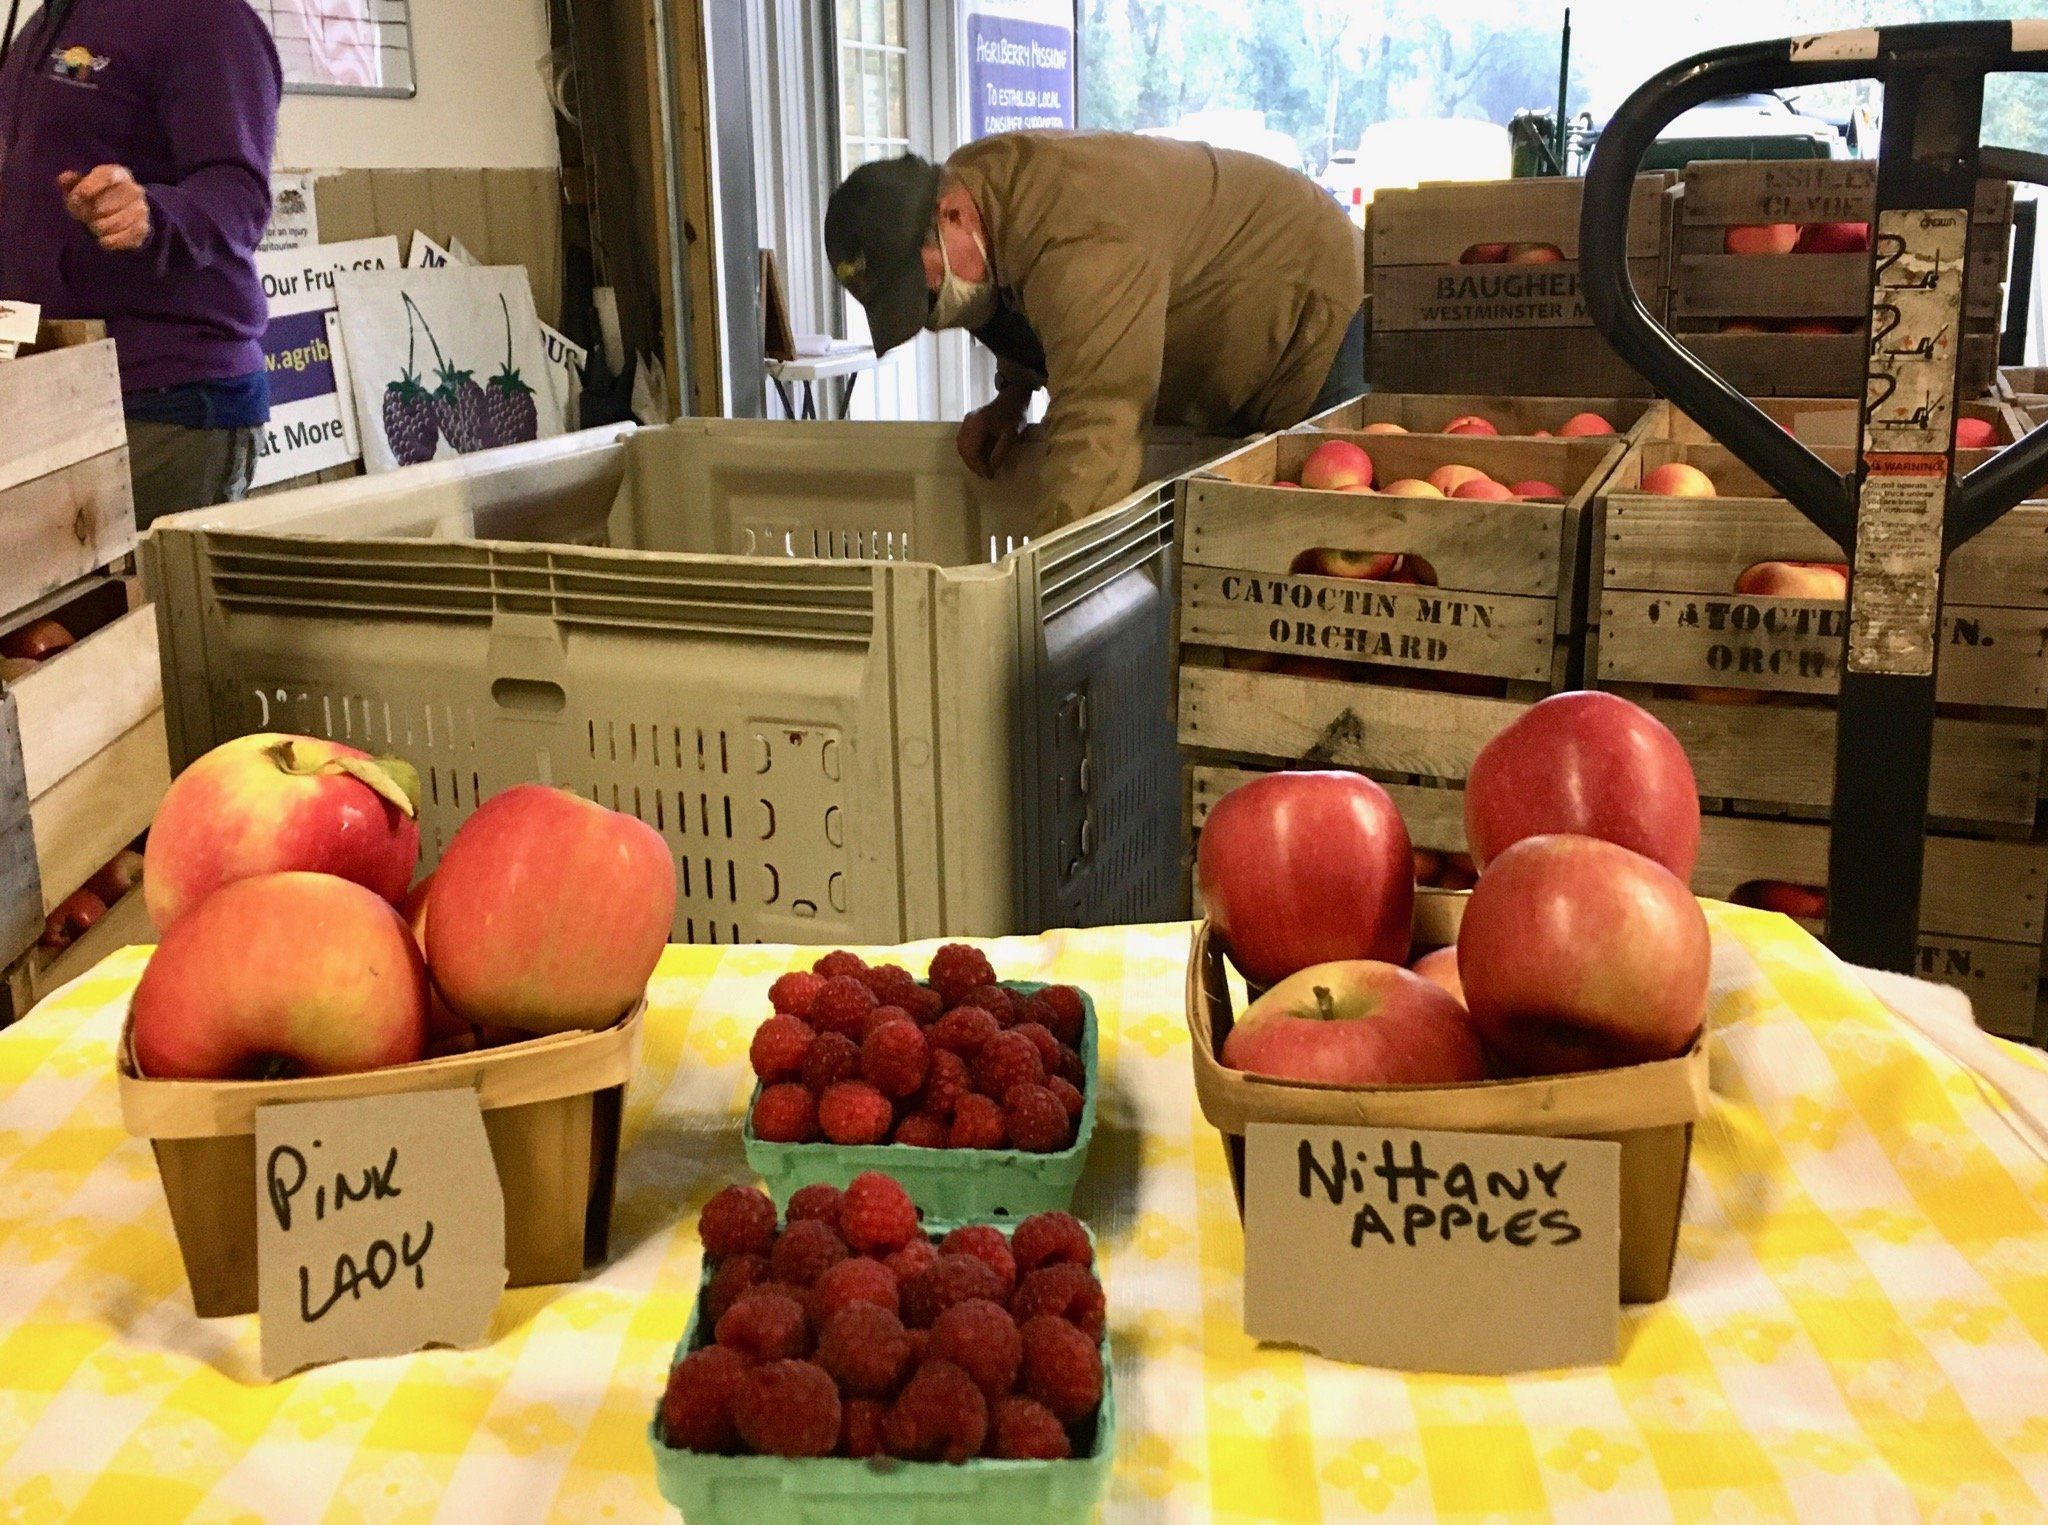 Previous Happening: Second to last week of our Fall Farm Share... Holiday Farm Share is on the horizon!